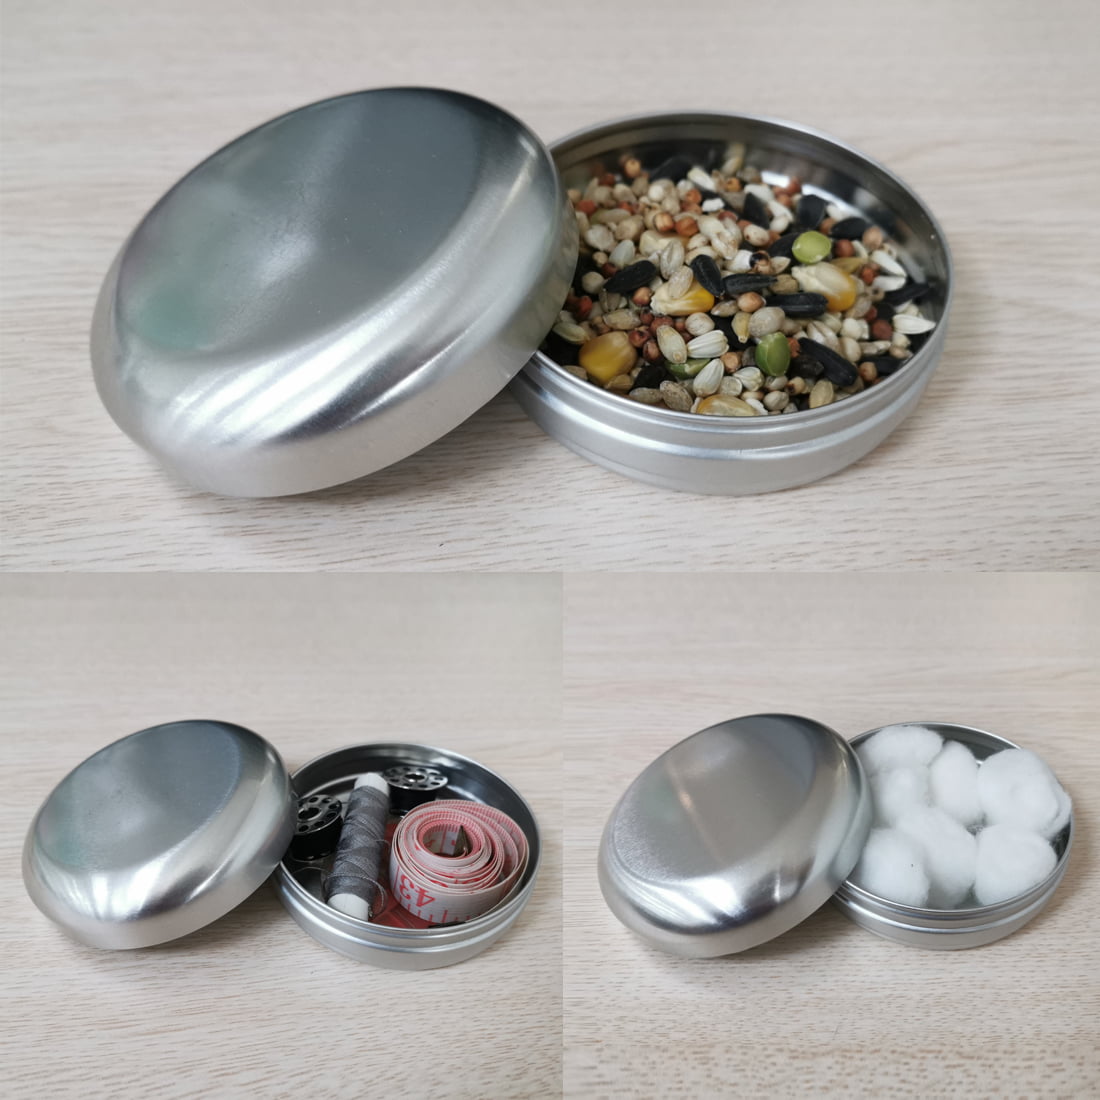 Unique Bargains Round Aluminum Cans Tin Can Screw Top Metal Lid Containers  Silver Tone 1.73x0.71 6 Pcs : Target